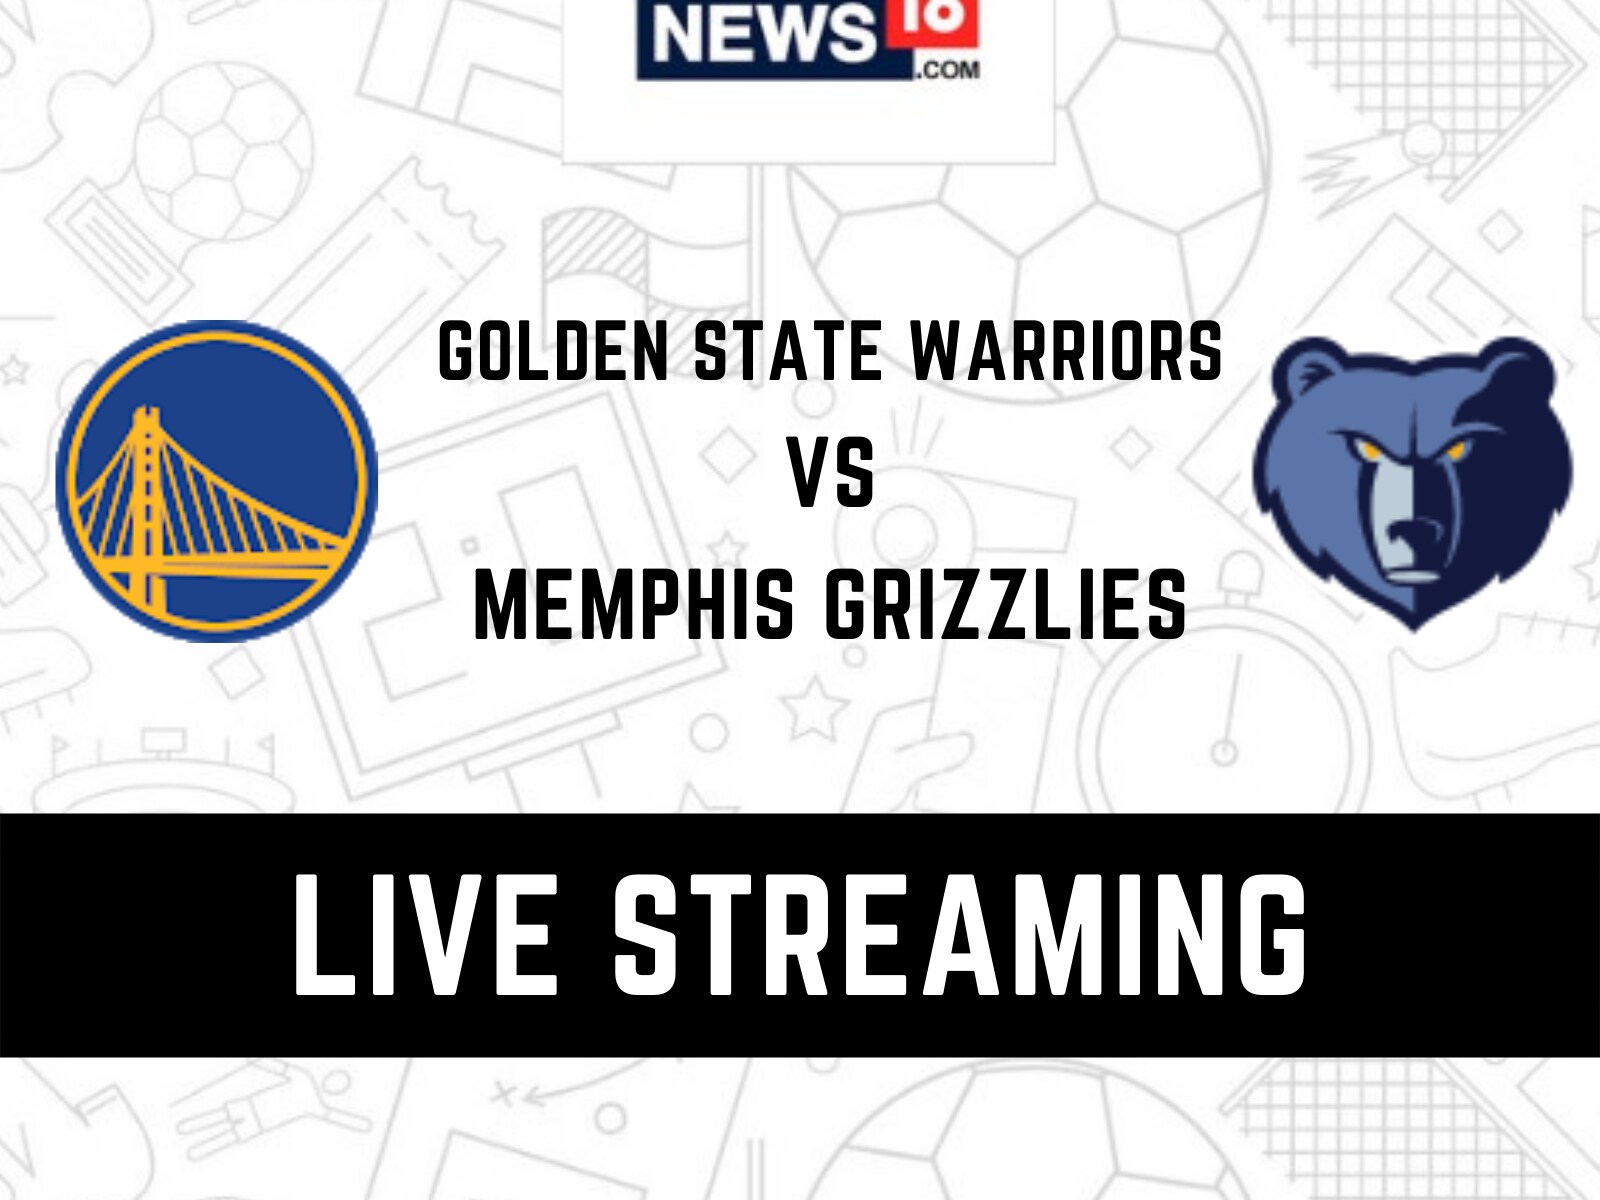 Golden State Warriors vs Memphis Grizzlies Live Streaming When and Where to Watch NBA 2022 Western Conference Semifinals Live Coverage on Live TV Online